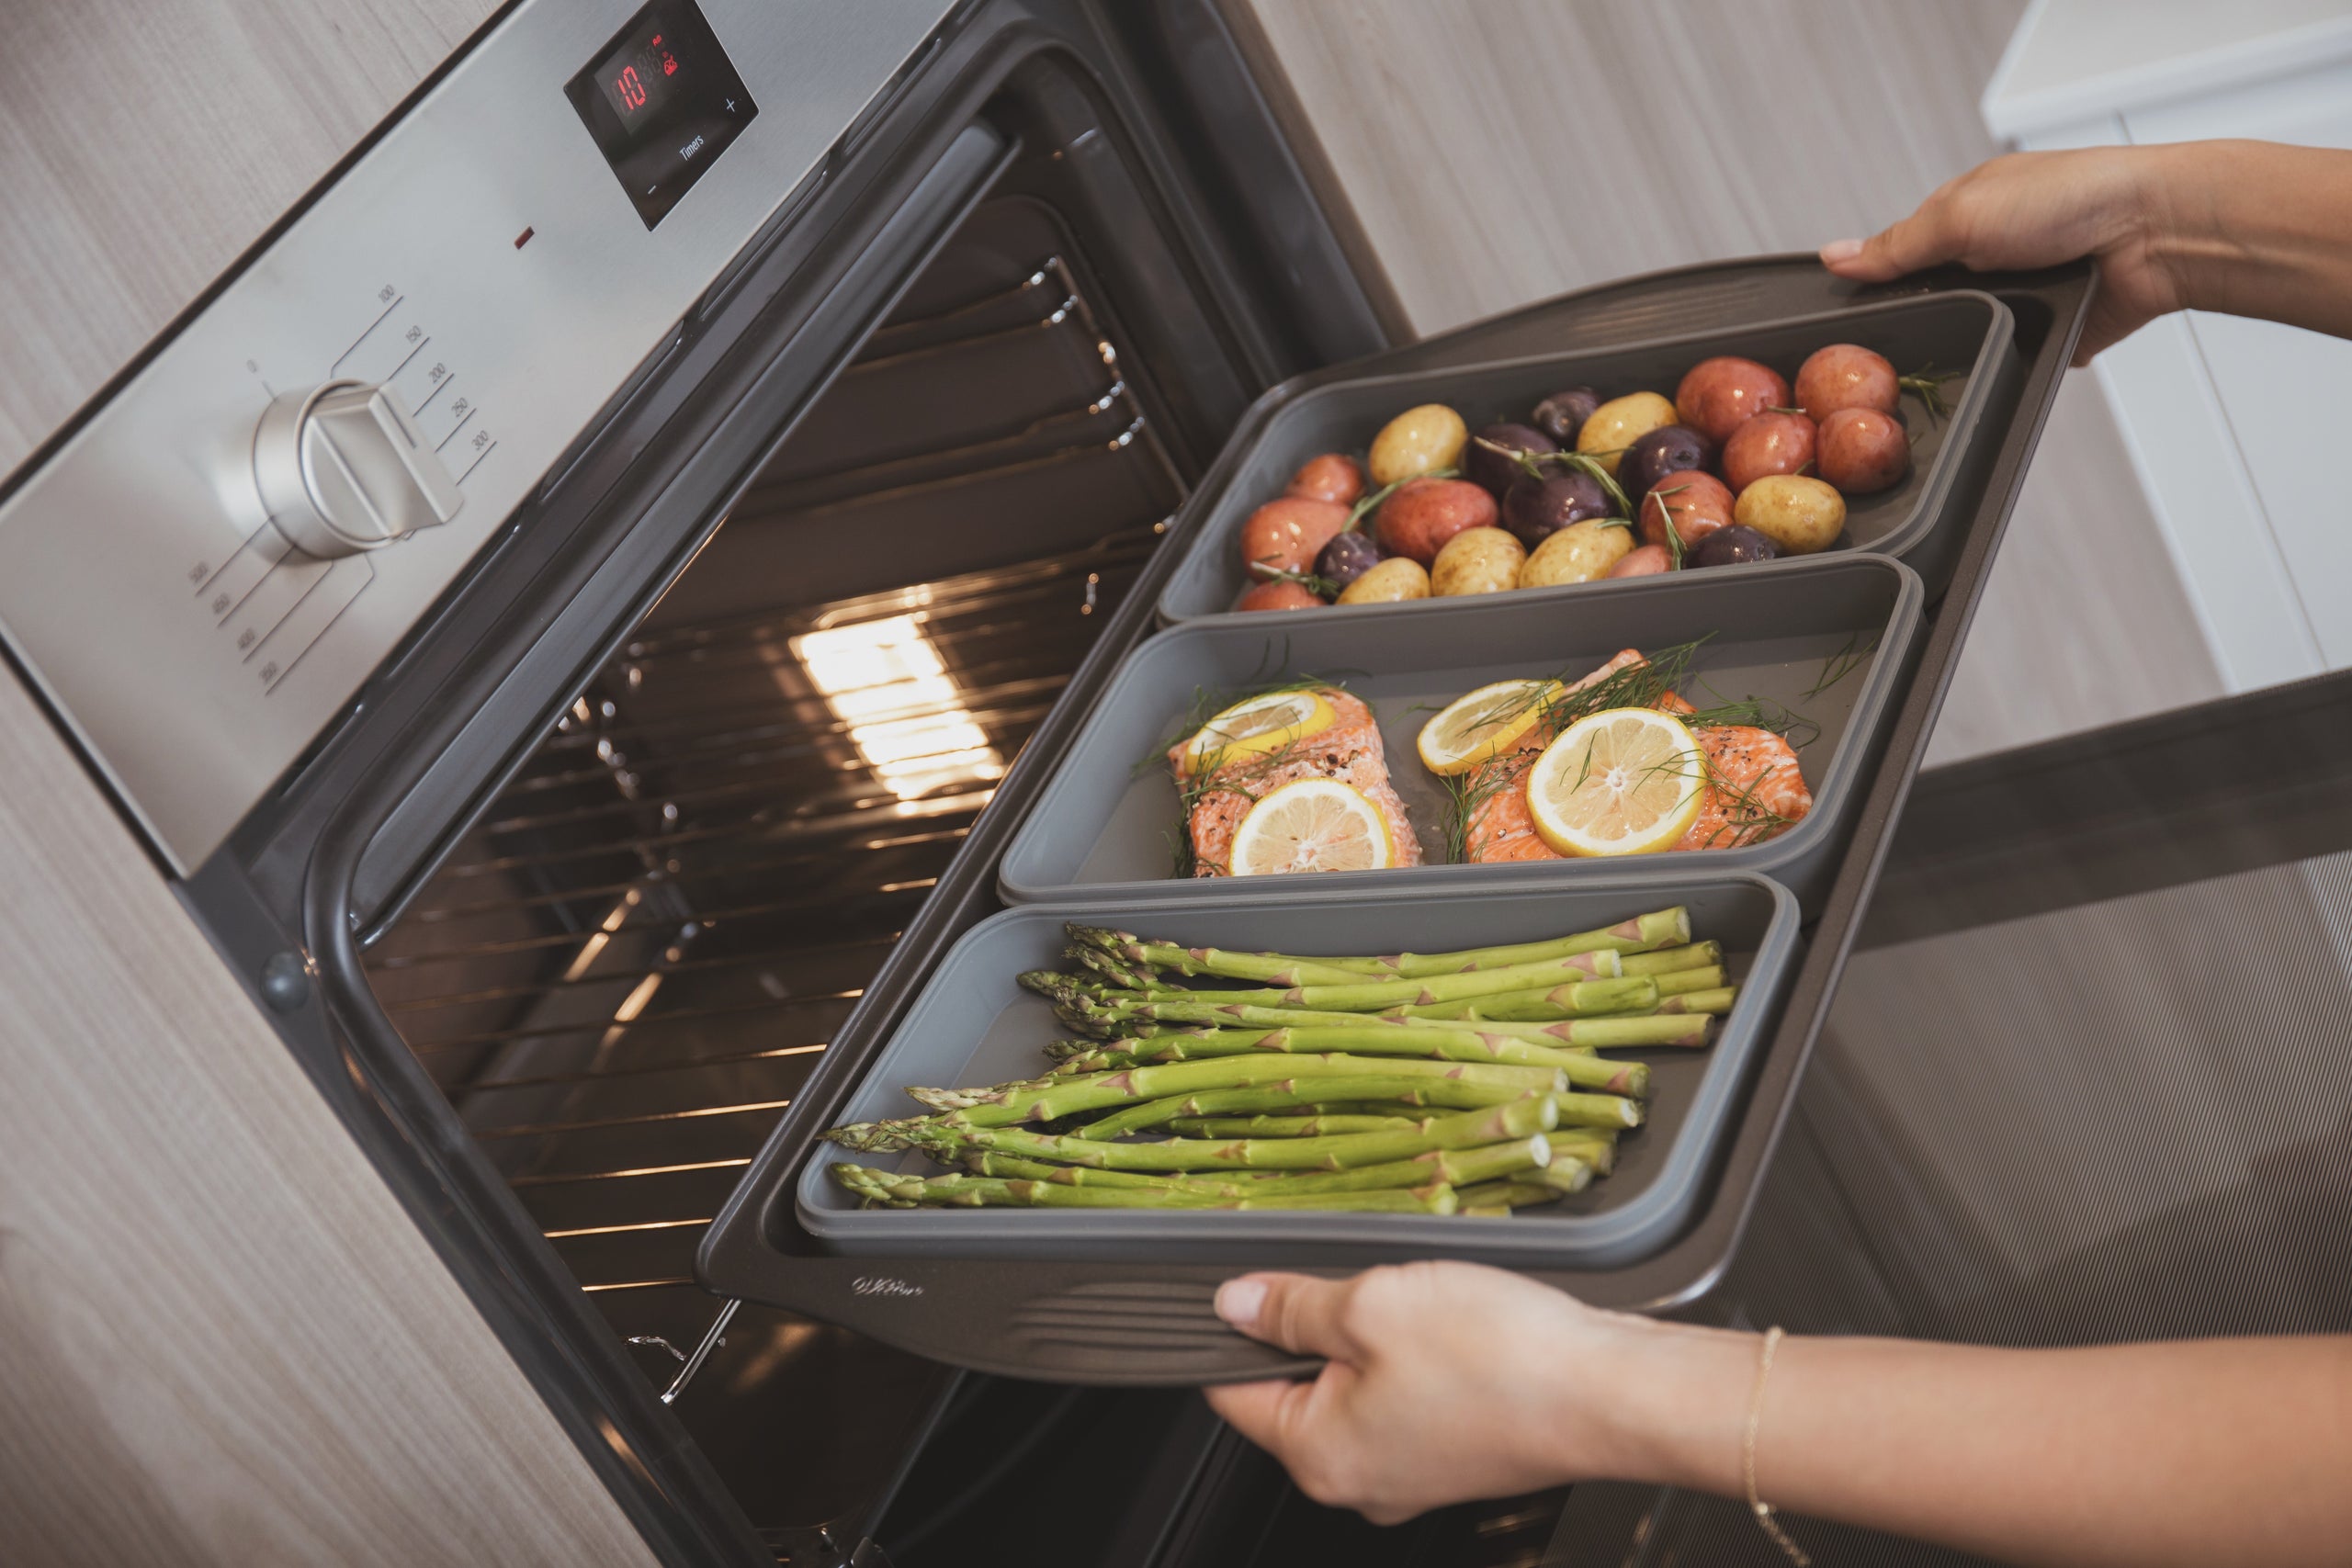 Cook and store with our premium, food-grade platinum silicone trays that are oven-safe, microwave safe, and dishwasher safe. Each tray comes with an air-sealed lid to store all your meals without the mess.You can fit them perfectly on a standard sized half sheet pan to streamline your cooking ingredients. Yay to no more overcooked meals!